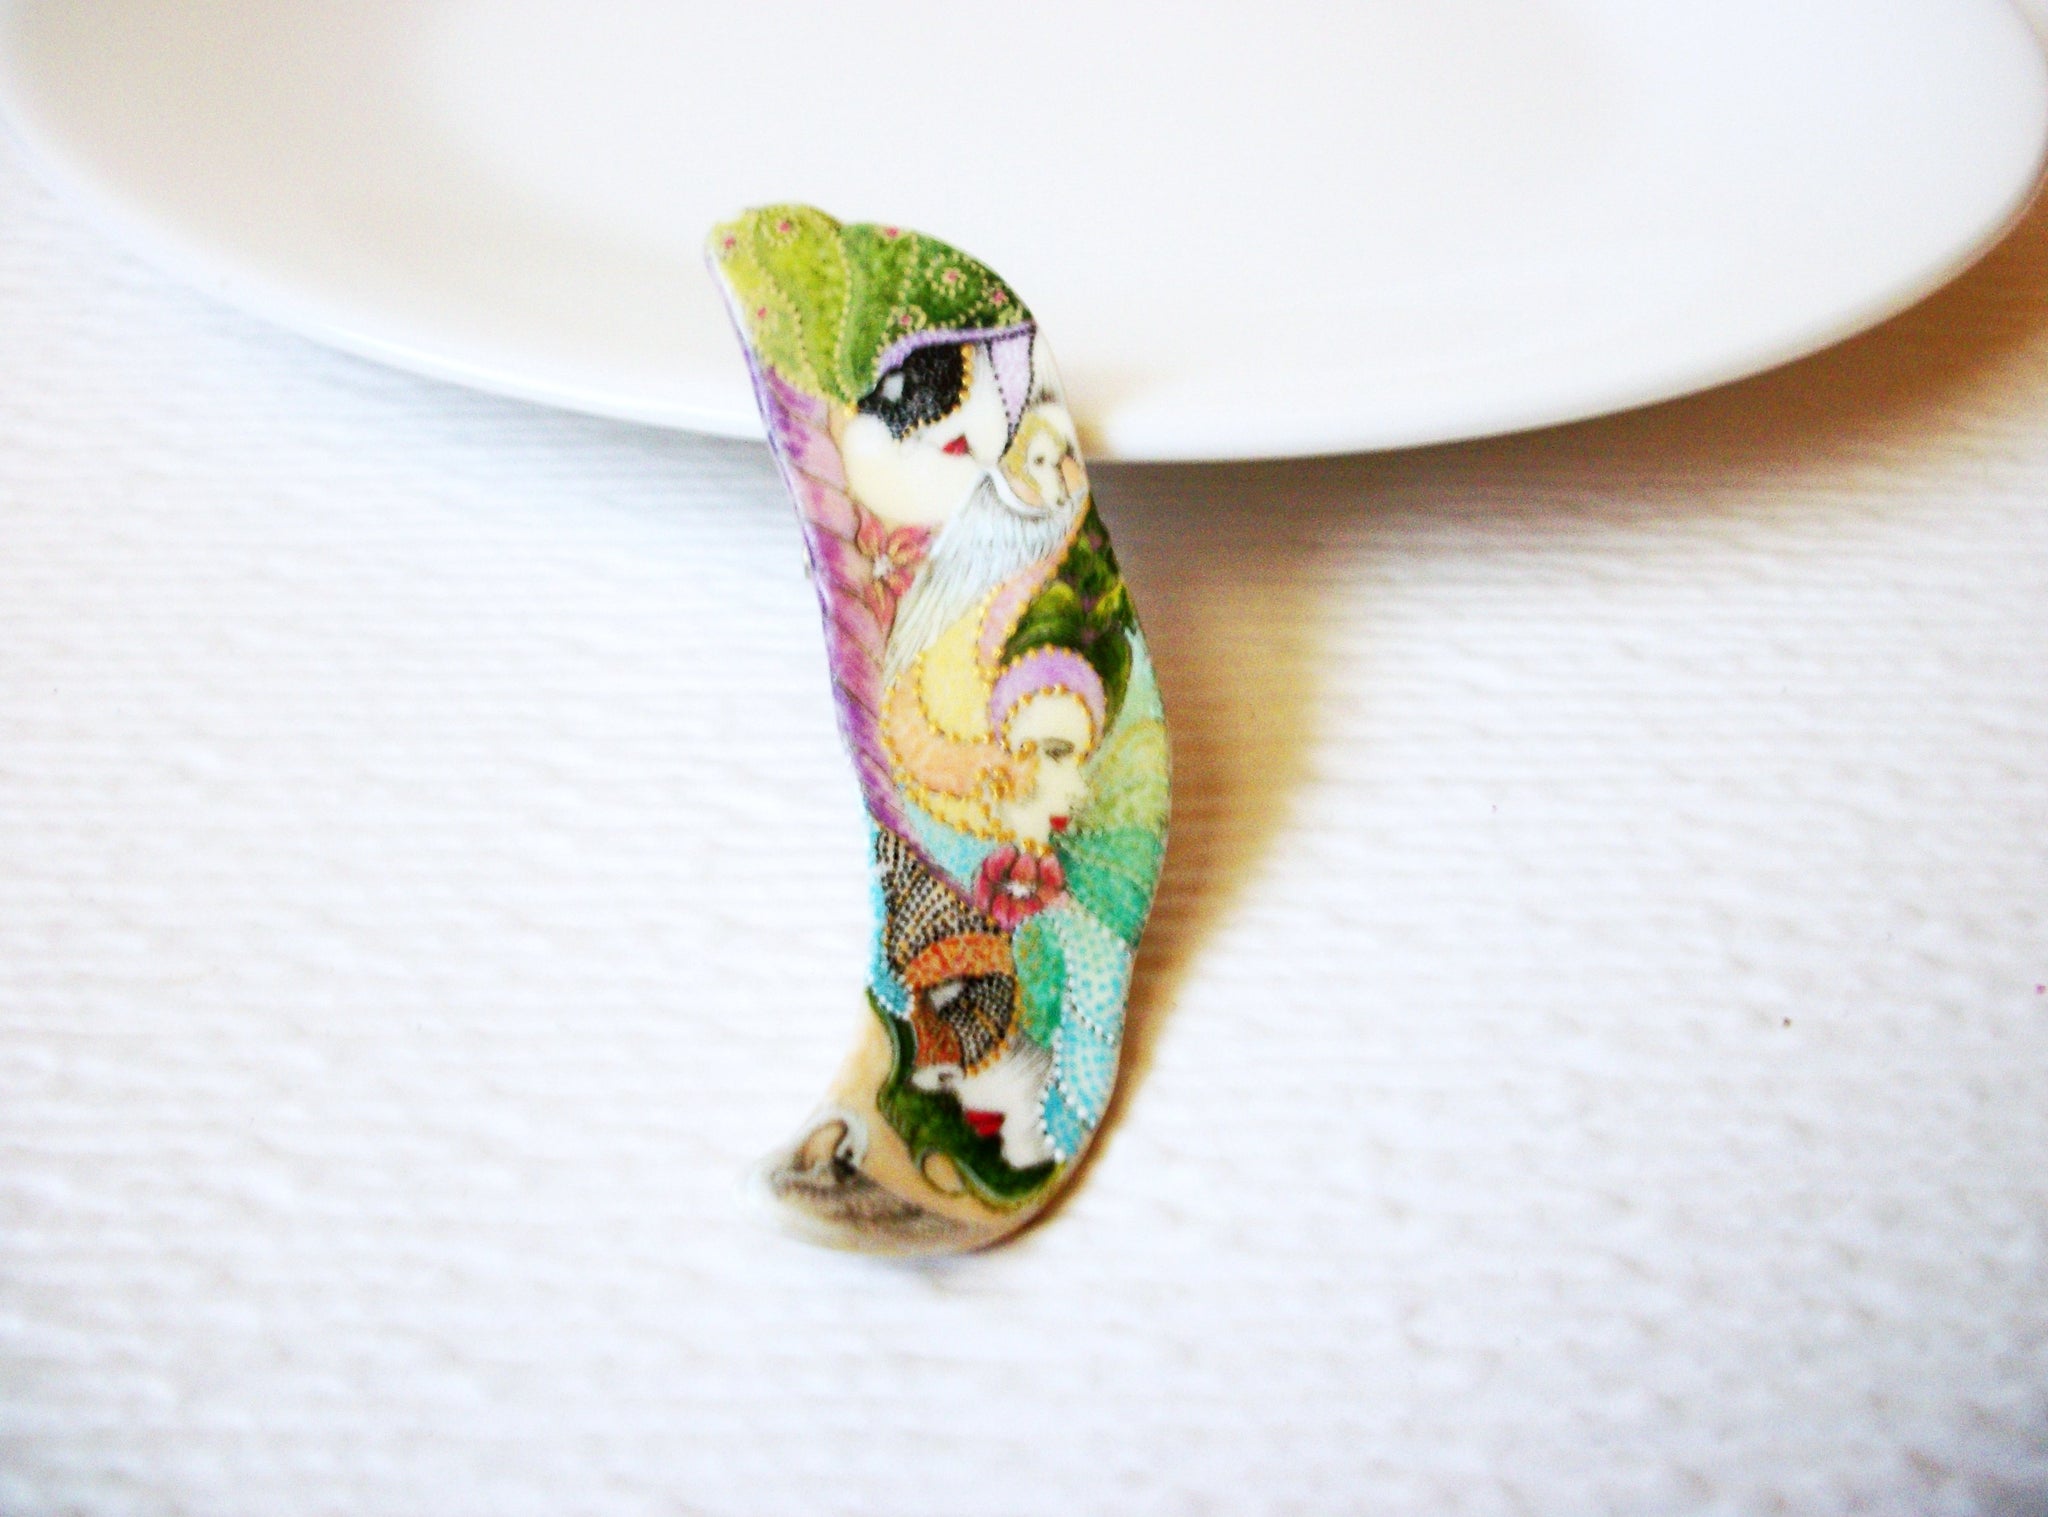 Vintage Unique Hand Painted Signed Shell Brooch Pin 121720